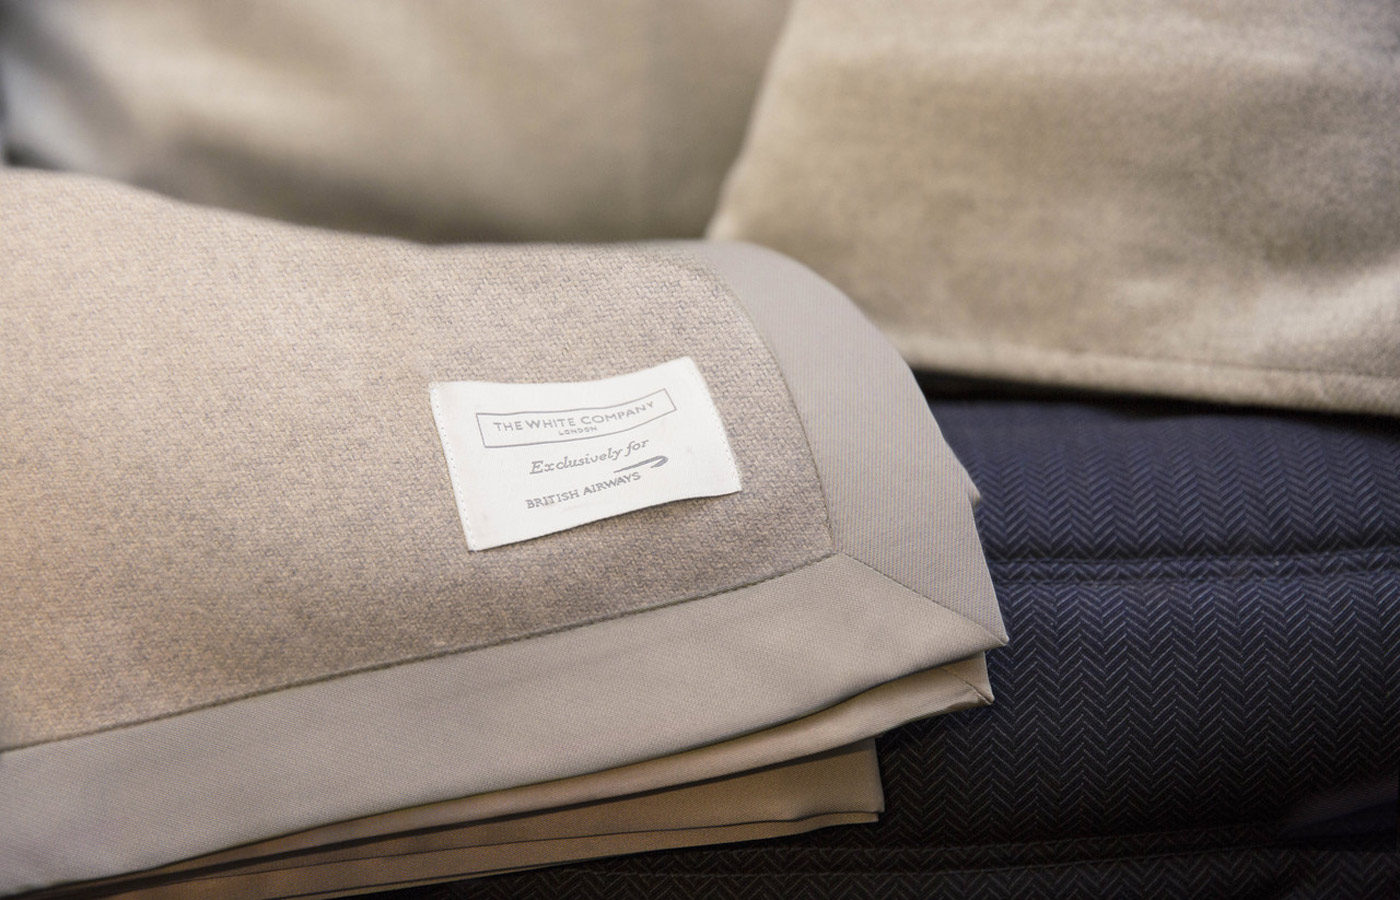 Comfortable White Company bedding in the British Airways Club World cabin